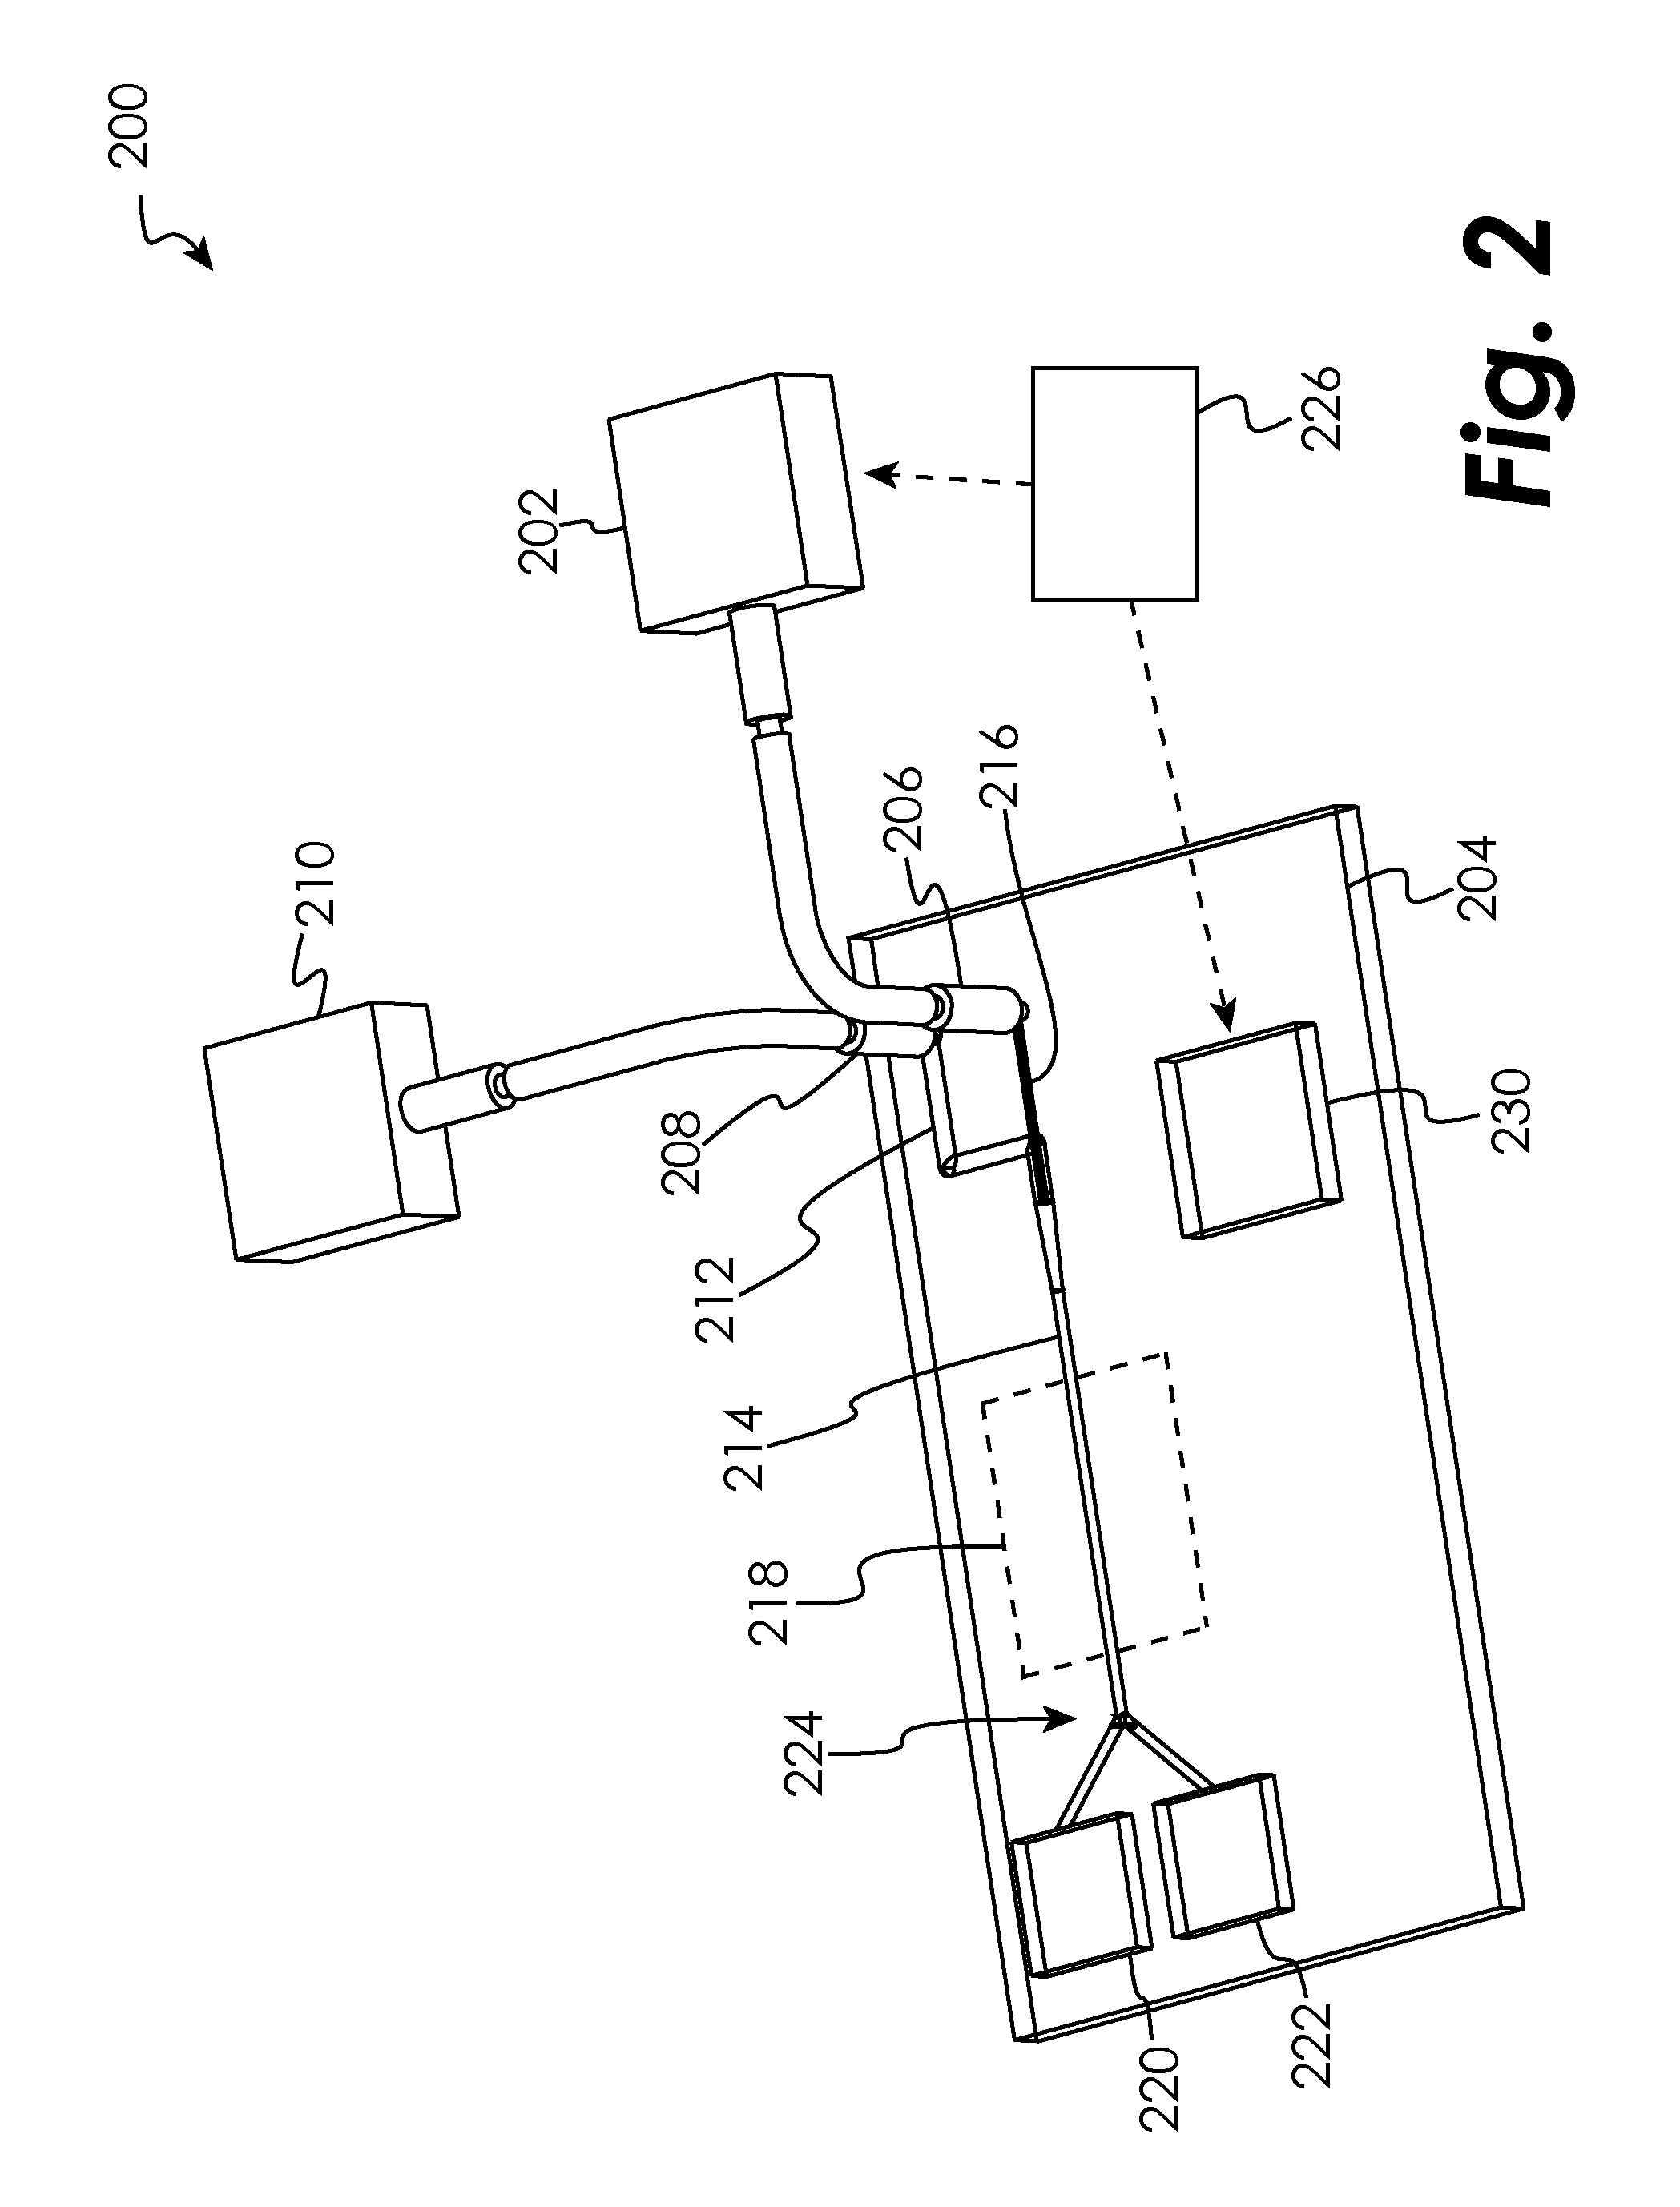 Microfluidic device having onboard tissue or cell sample handling capability